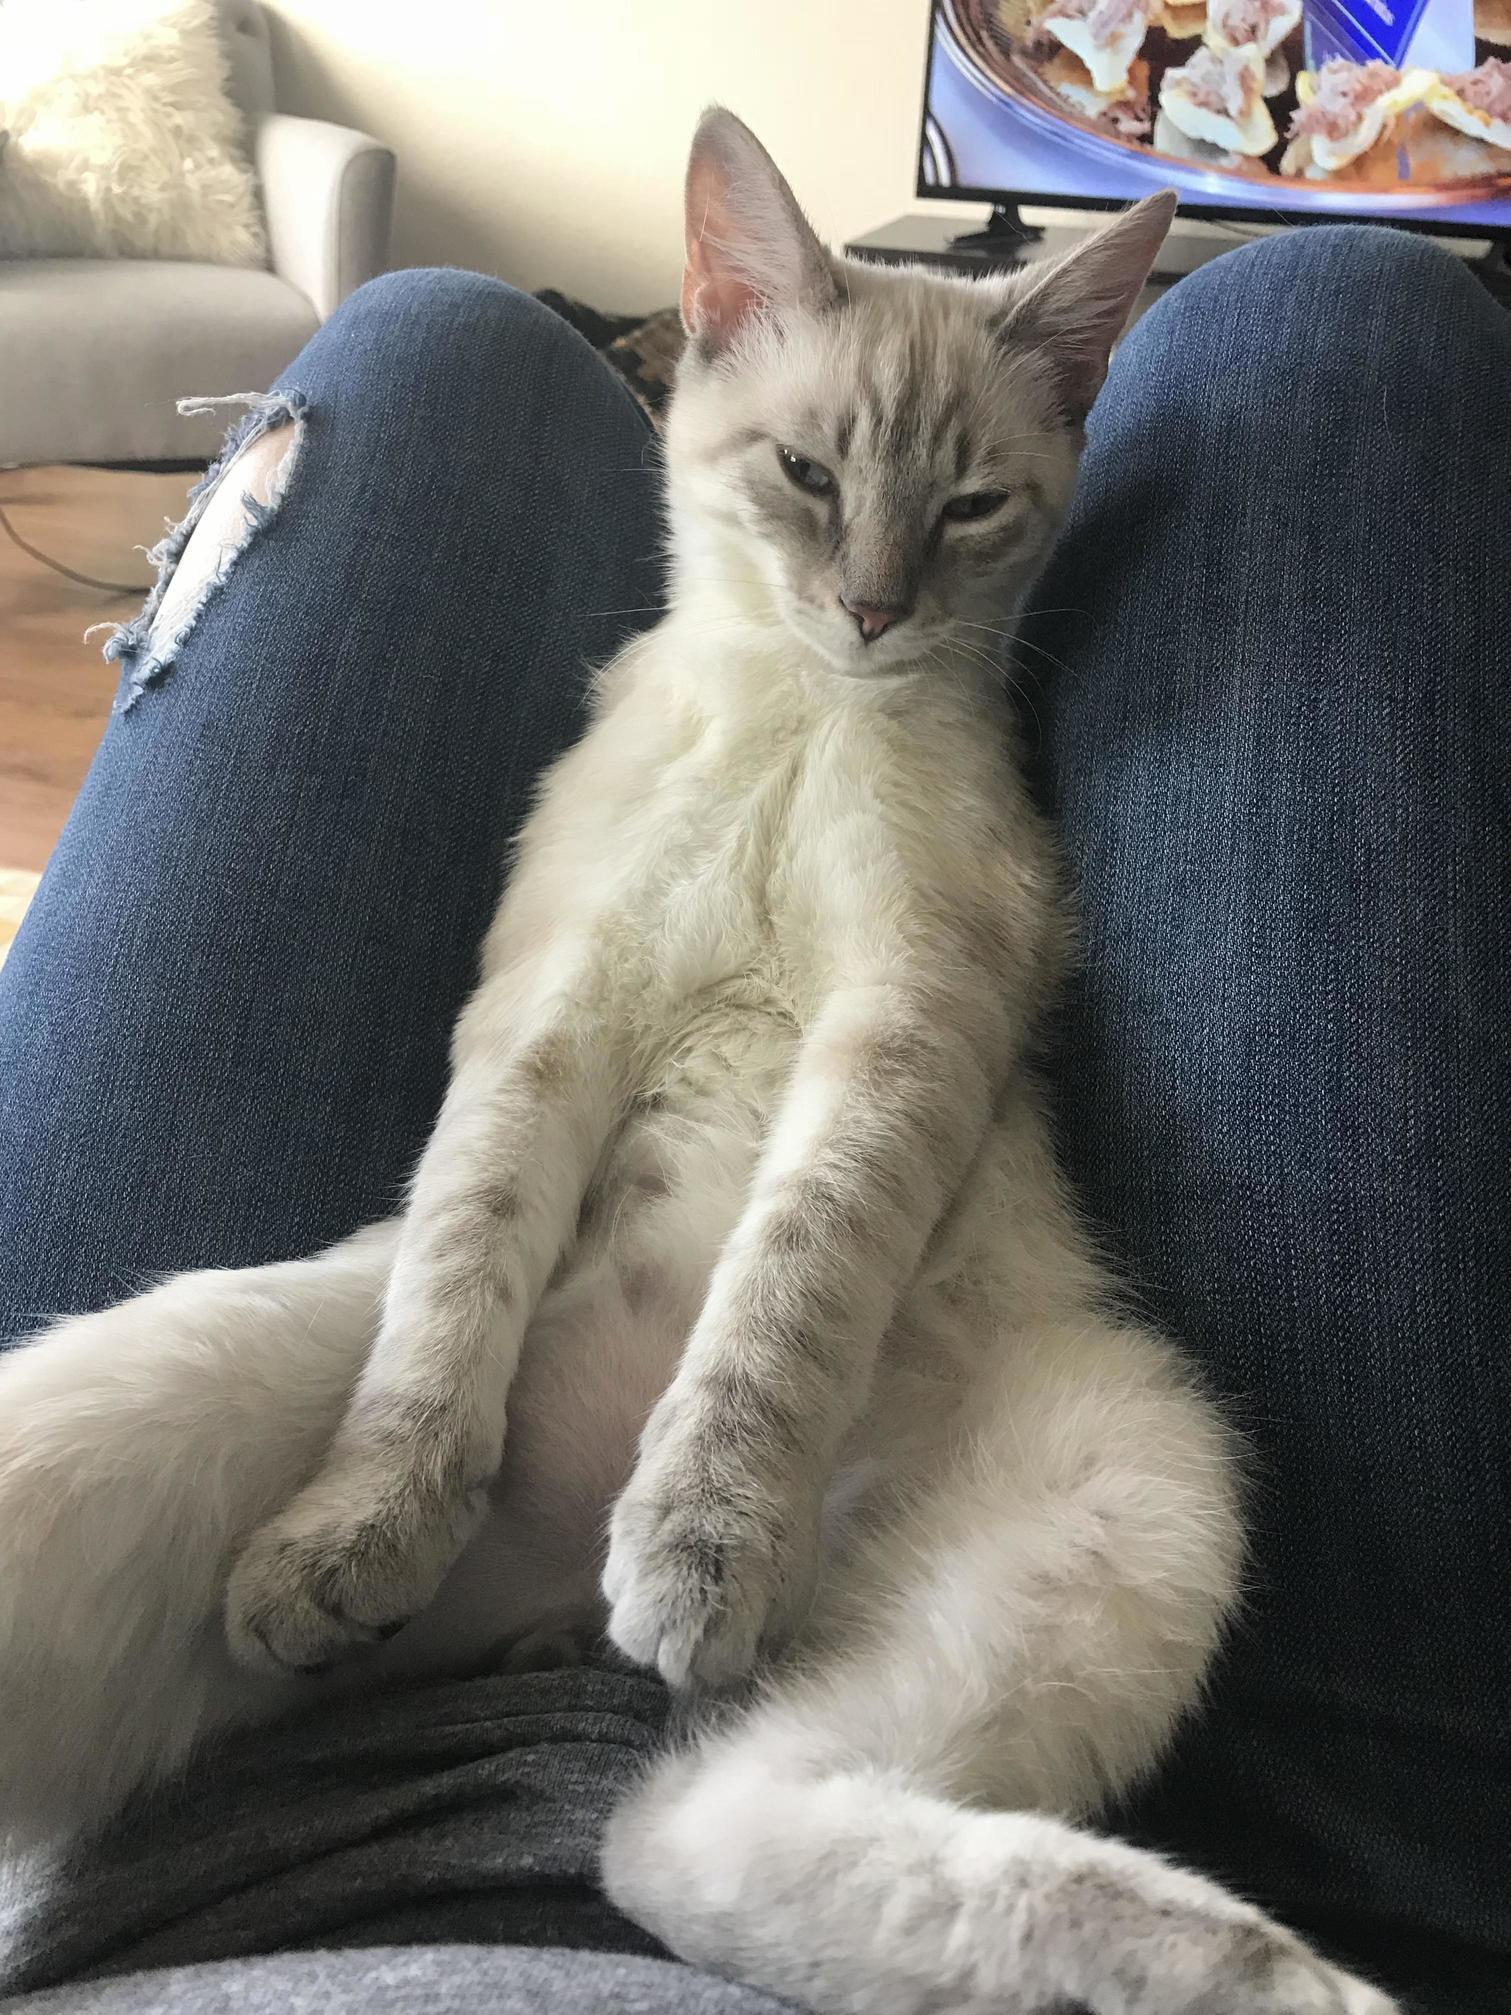 Cashew likes to chill